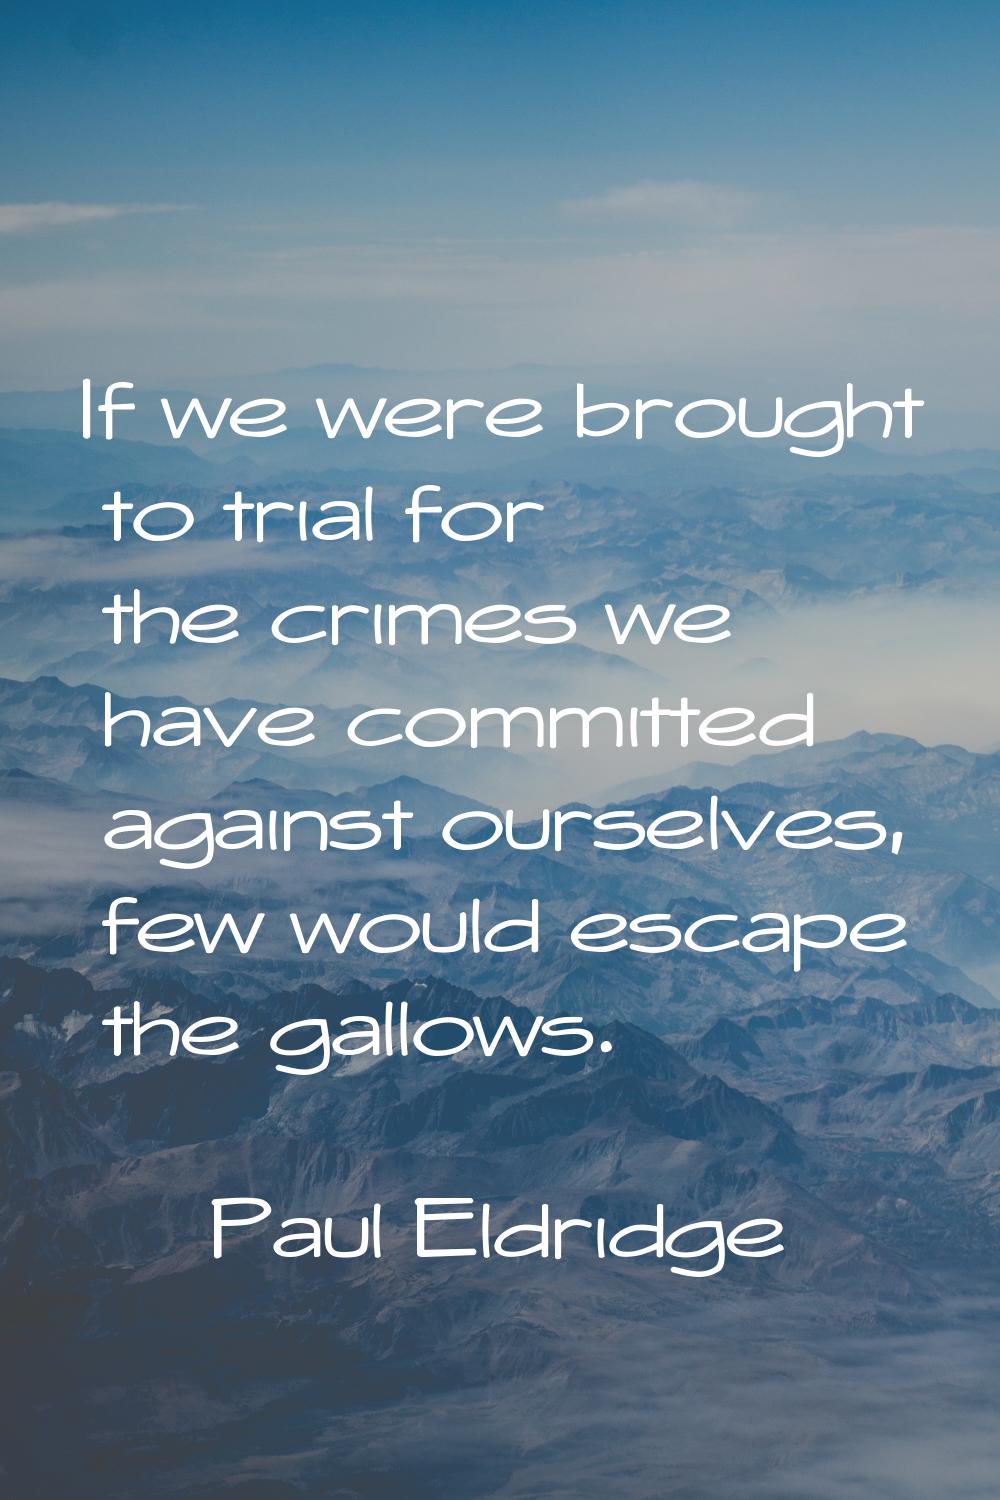 If we were brought to trial for the crimes we have committed against ourselves, few would escape th